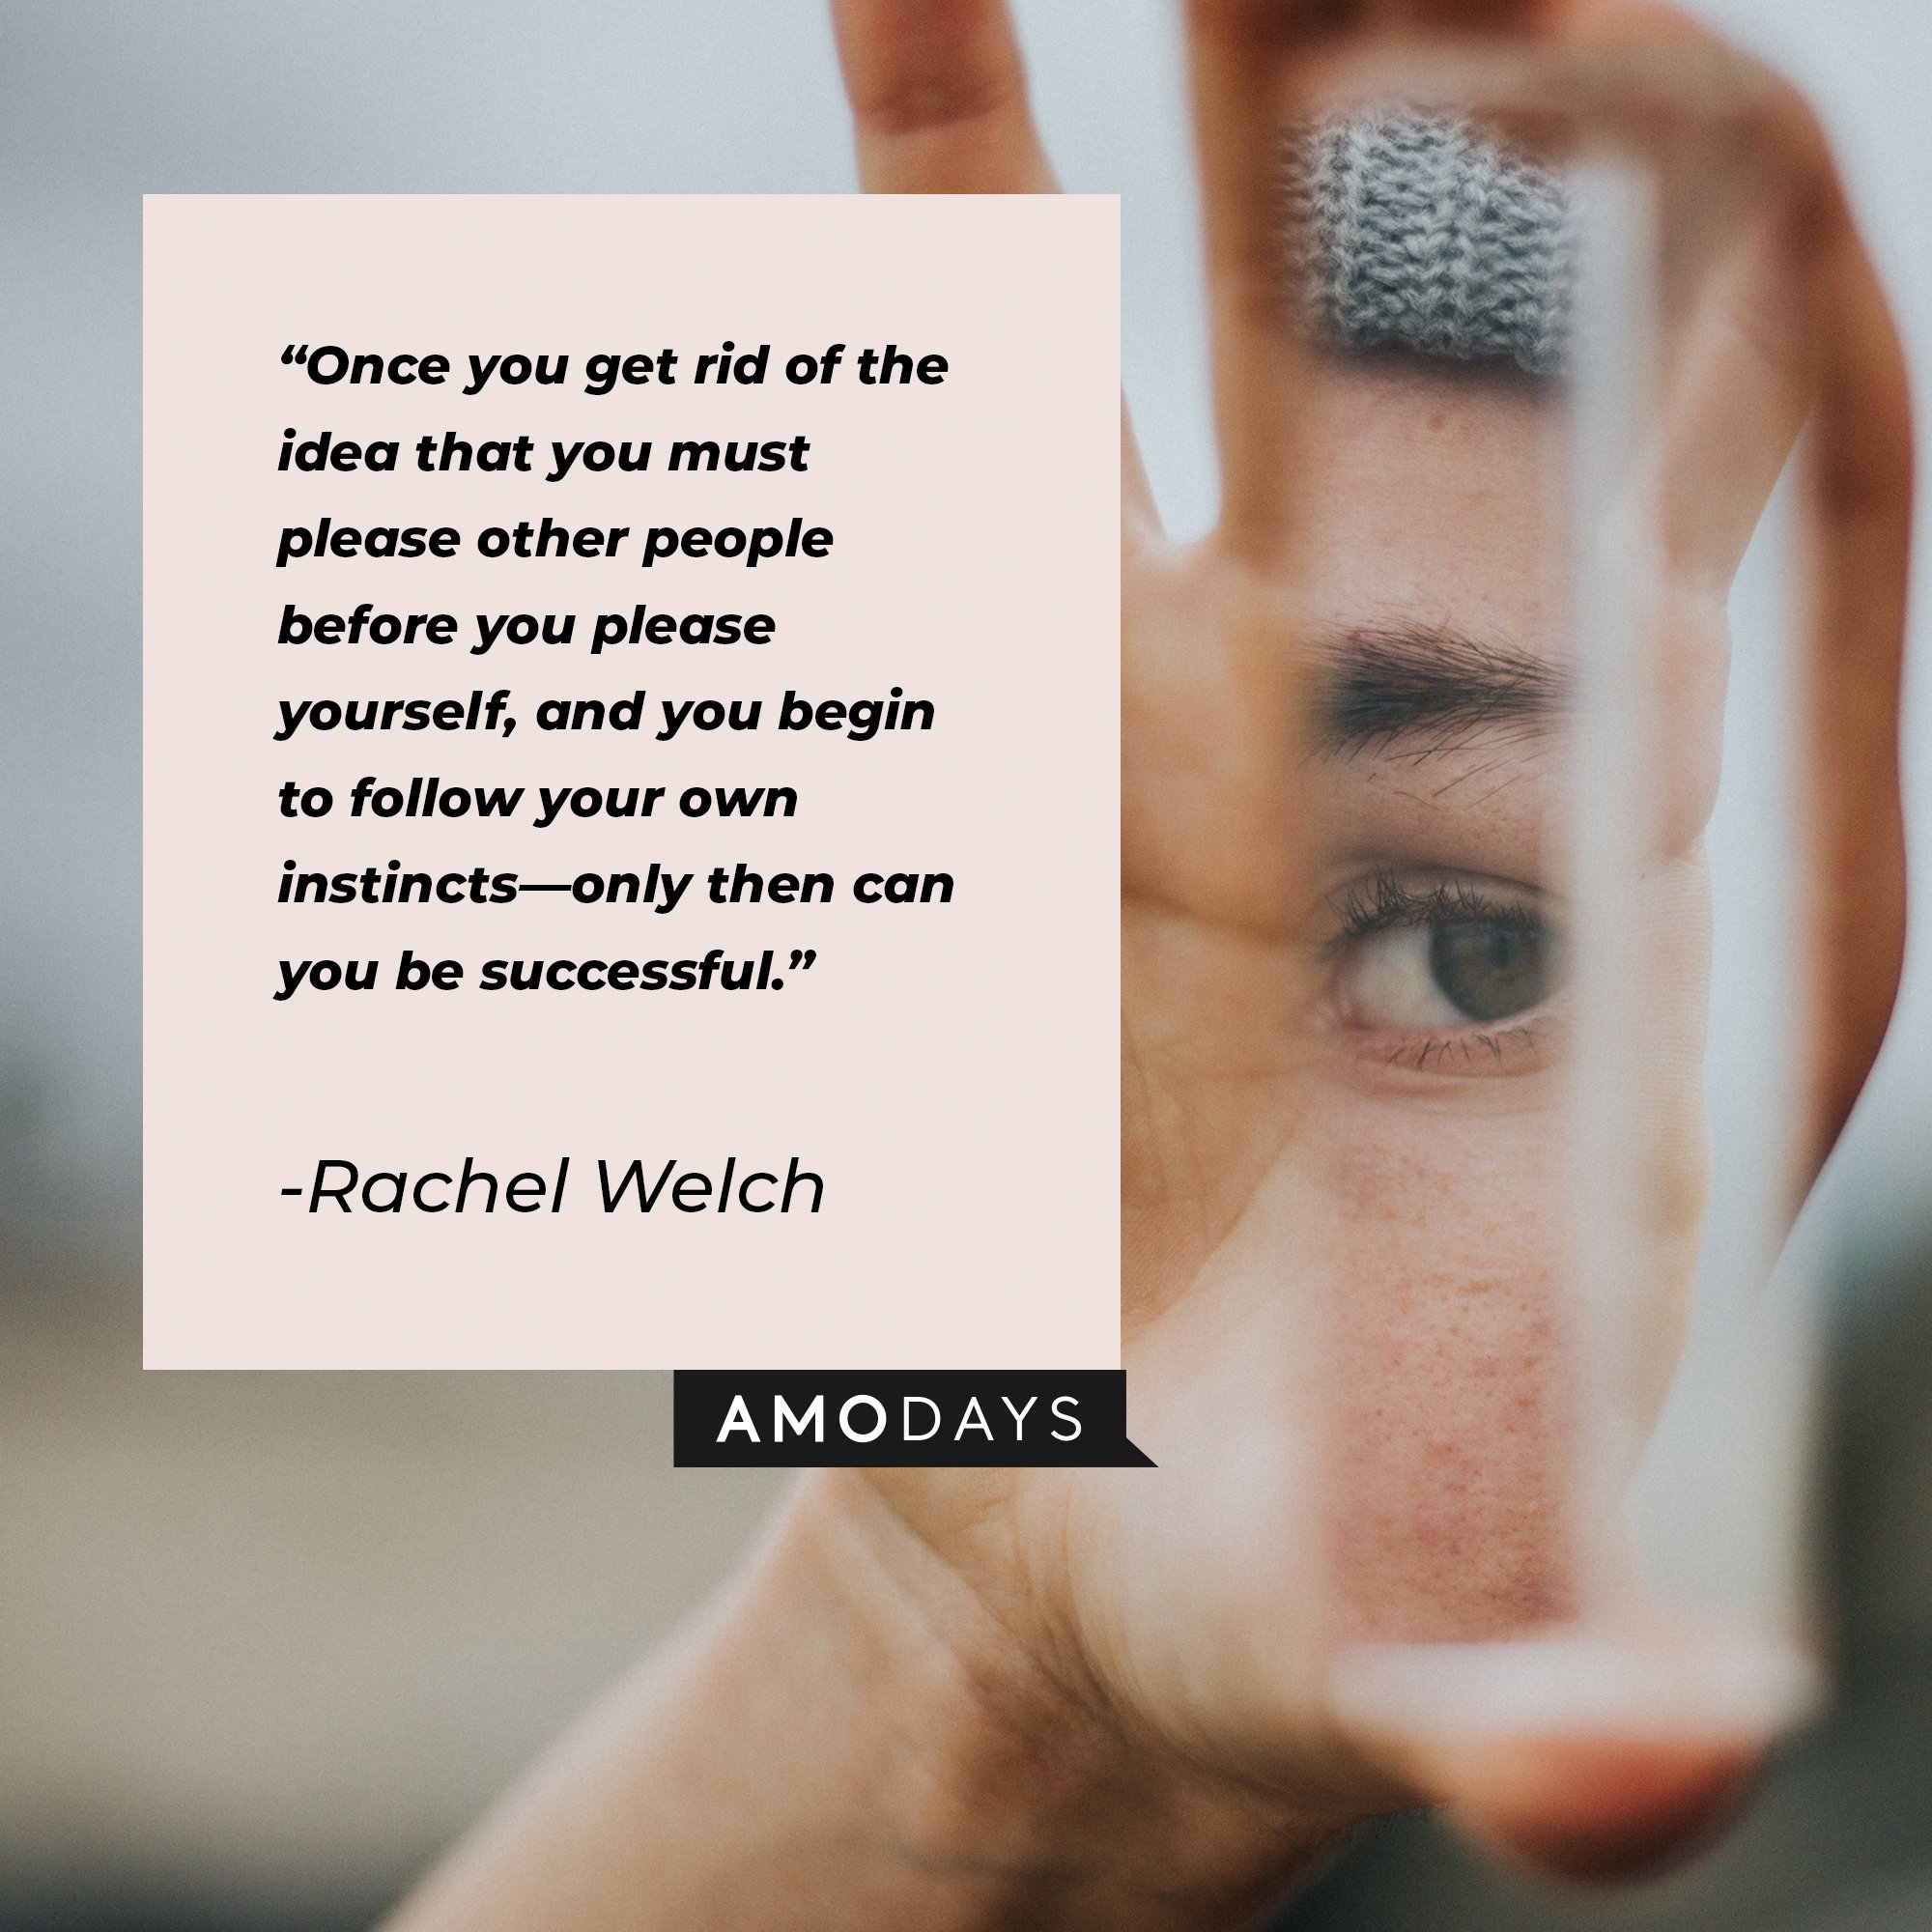 Rachel Welch’s quote: "Once you get rid of the idea that you must please other people before you please yourself, and you begin to follow your own instincts—only then can you be successful." | Image: AmoDays 